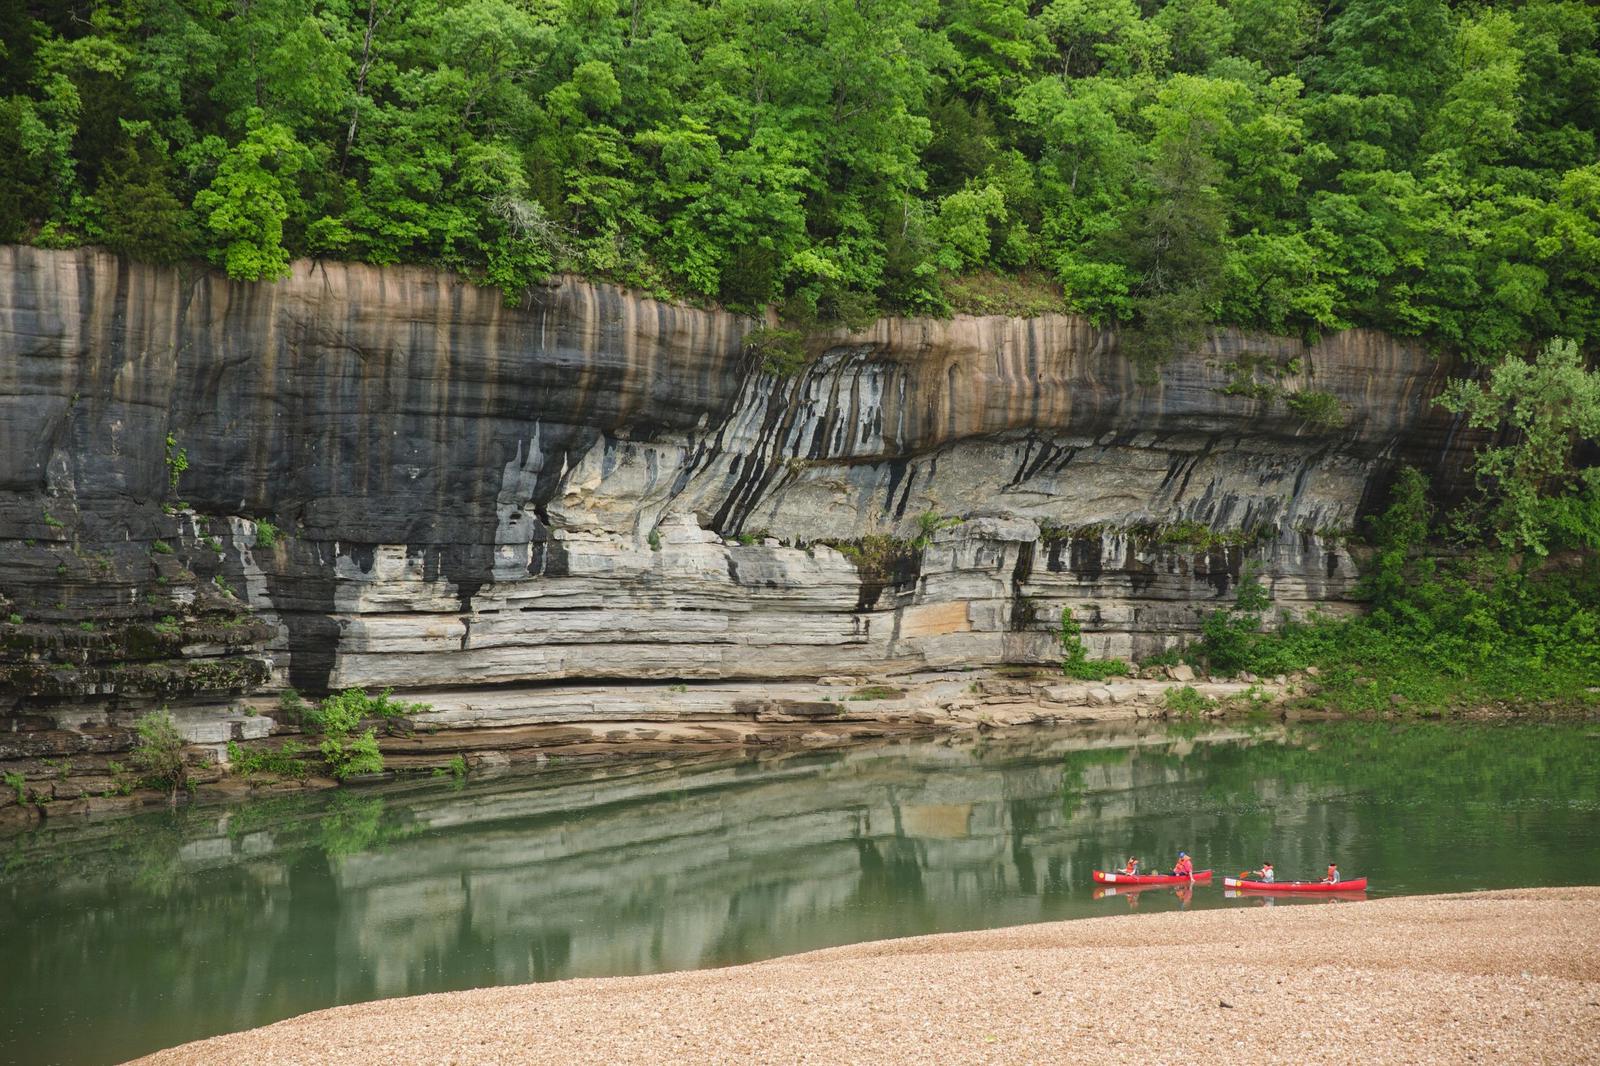 Two red canoes with people in them floating on a waterway past a large rock wall surrounded by green lush forest.